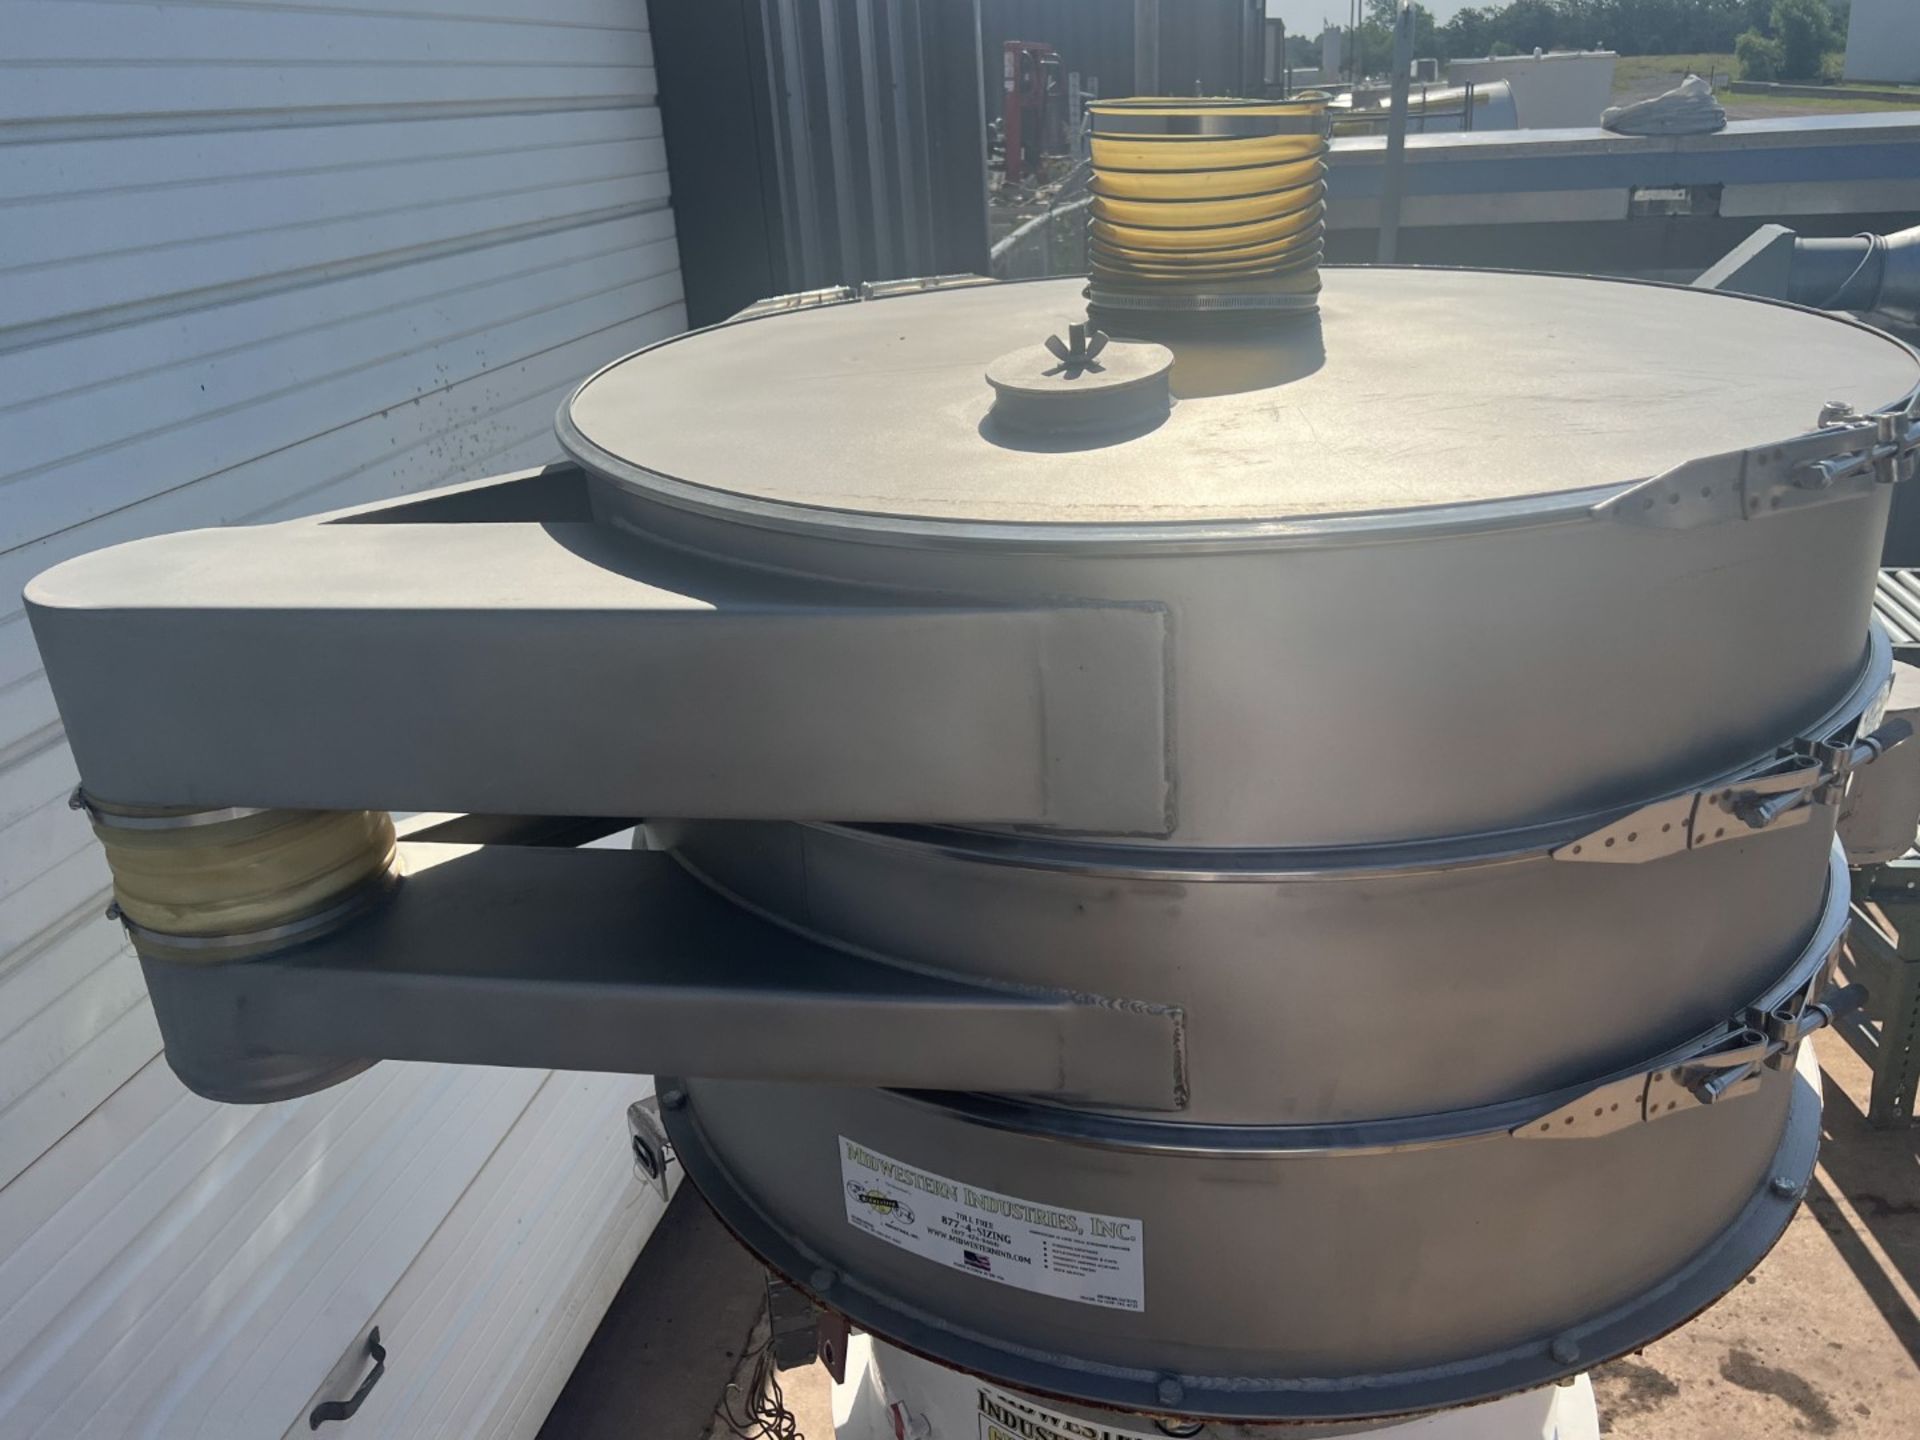 Midwestern 48" diameter Stainless Steel Double Deck Sifter - Image 4 of 5